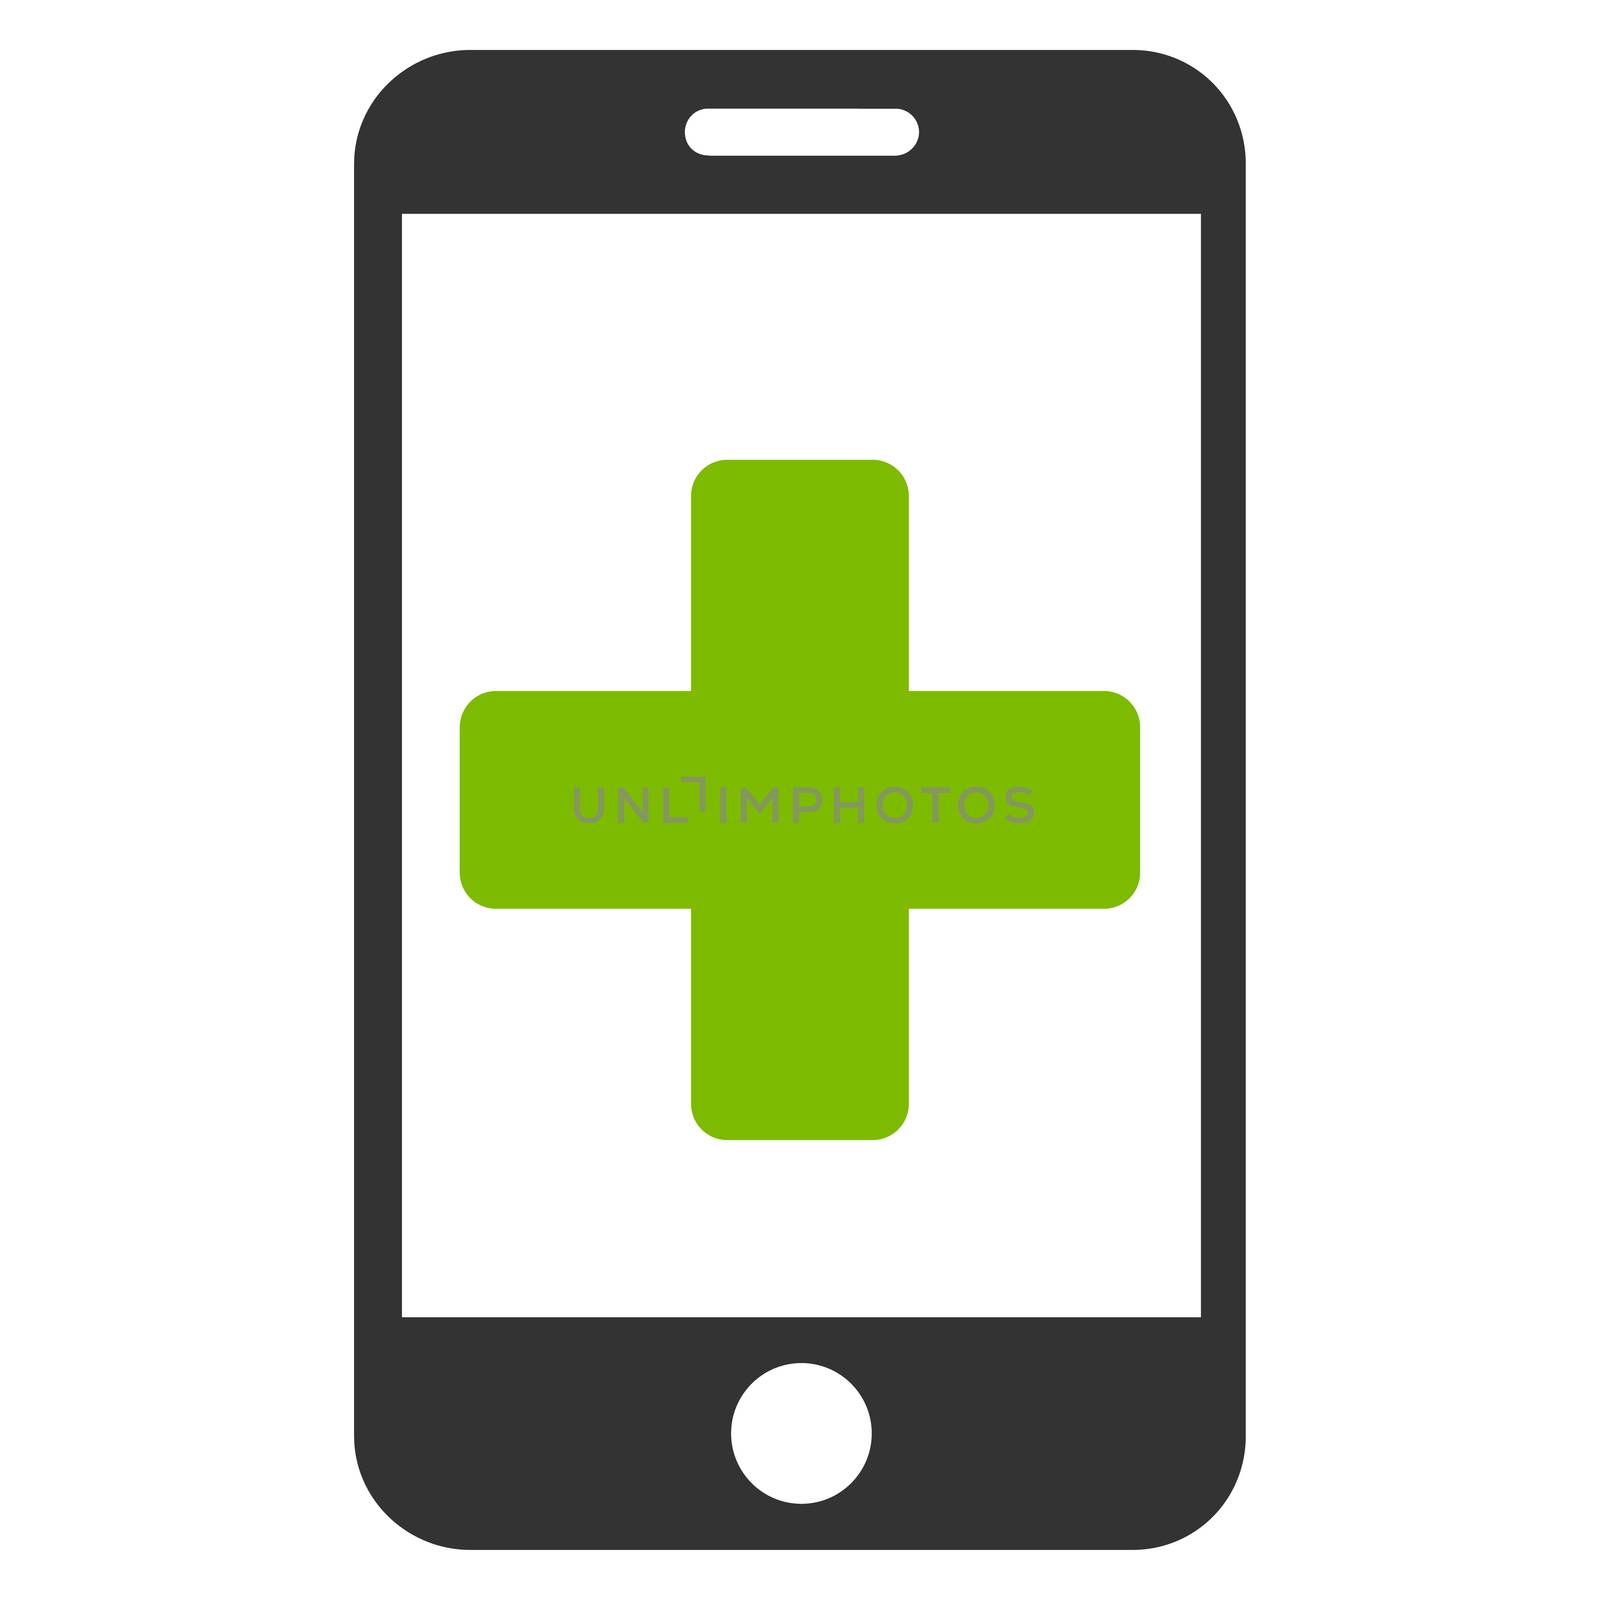 Online Help raster icon. Style is bicolor flat symbol, eco green and gray colors, rounded angles, white background.